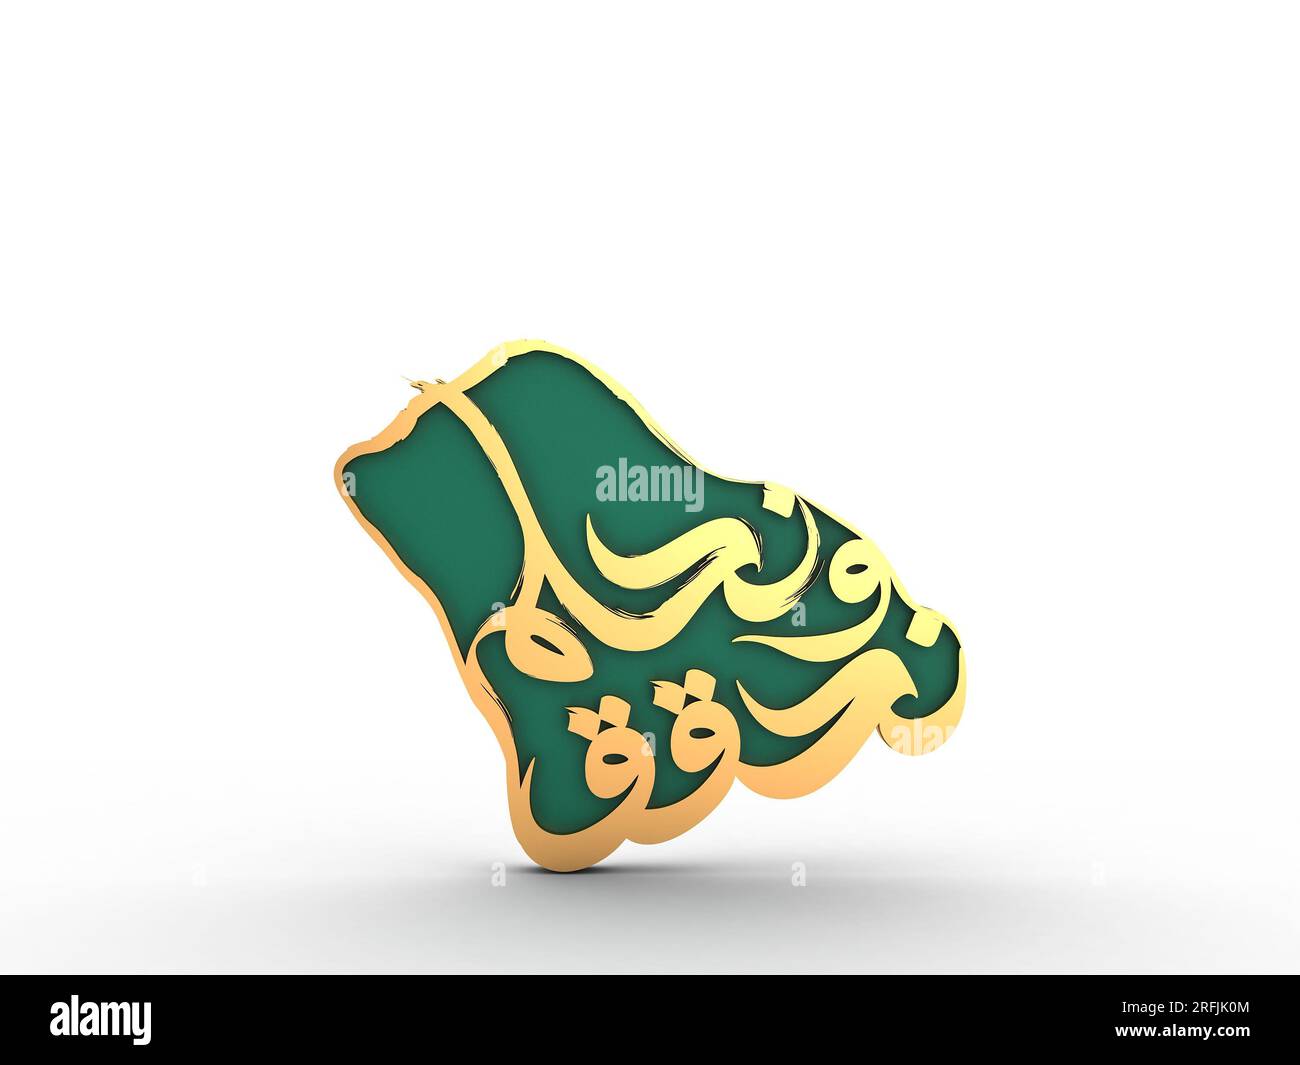 93rd Saudi Arabia National Day Identity with Arabic text saying 'We dream and achieve' Stock Photo